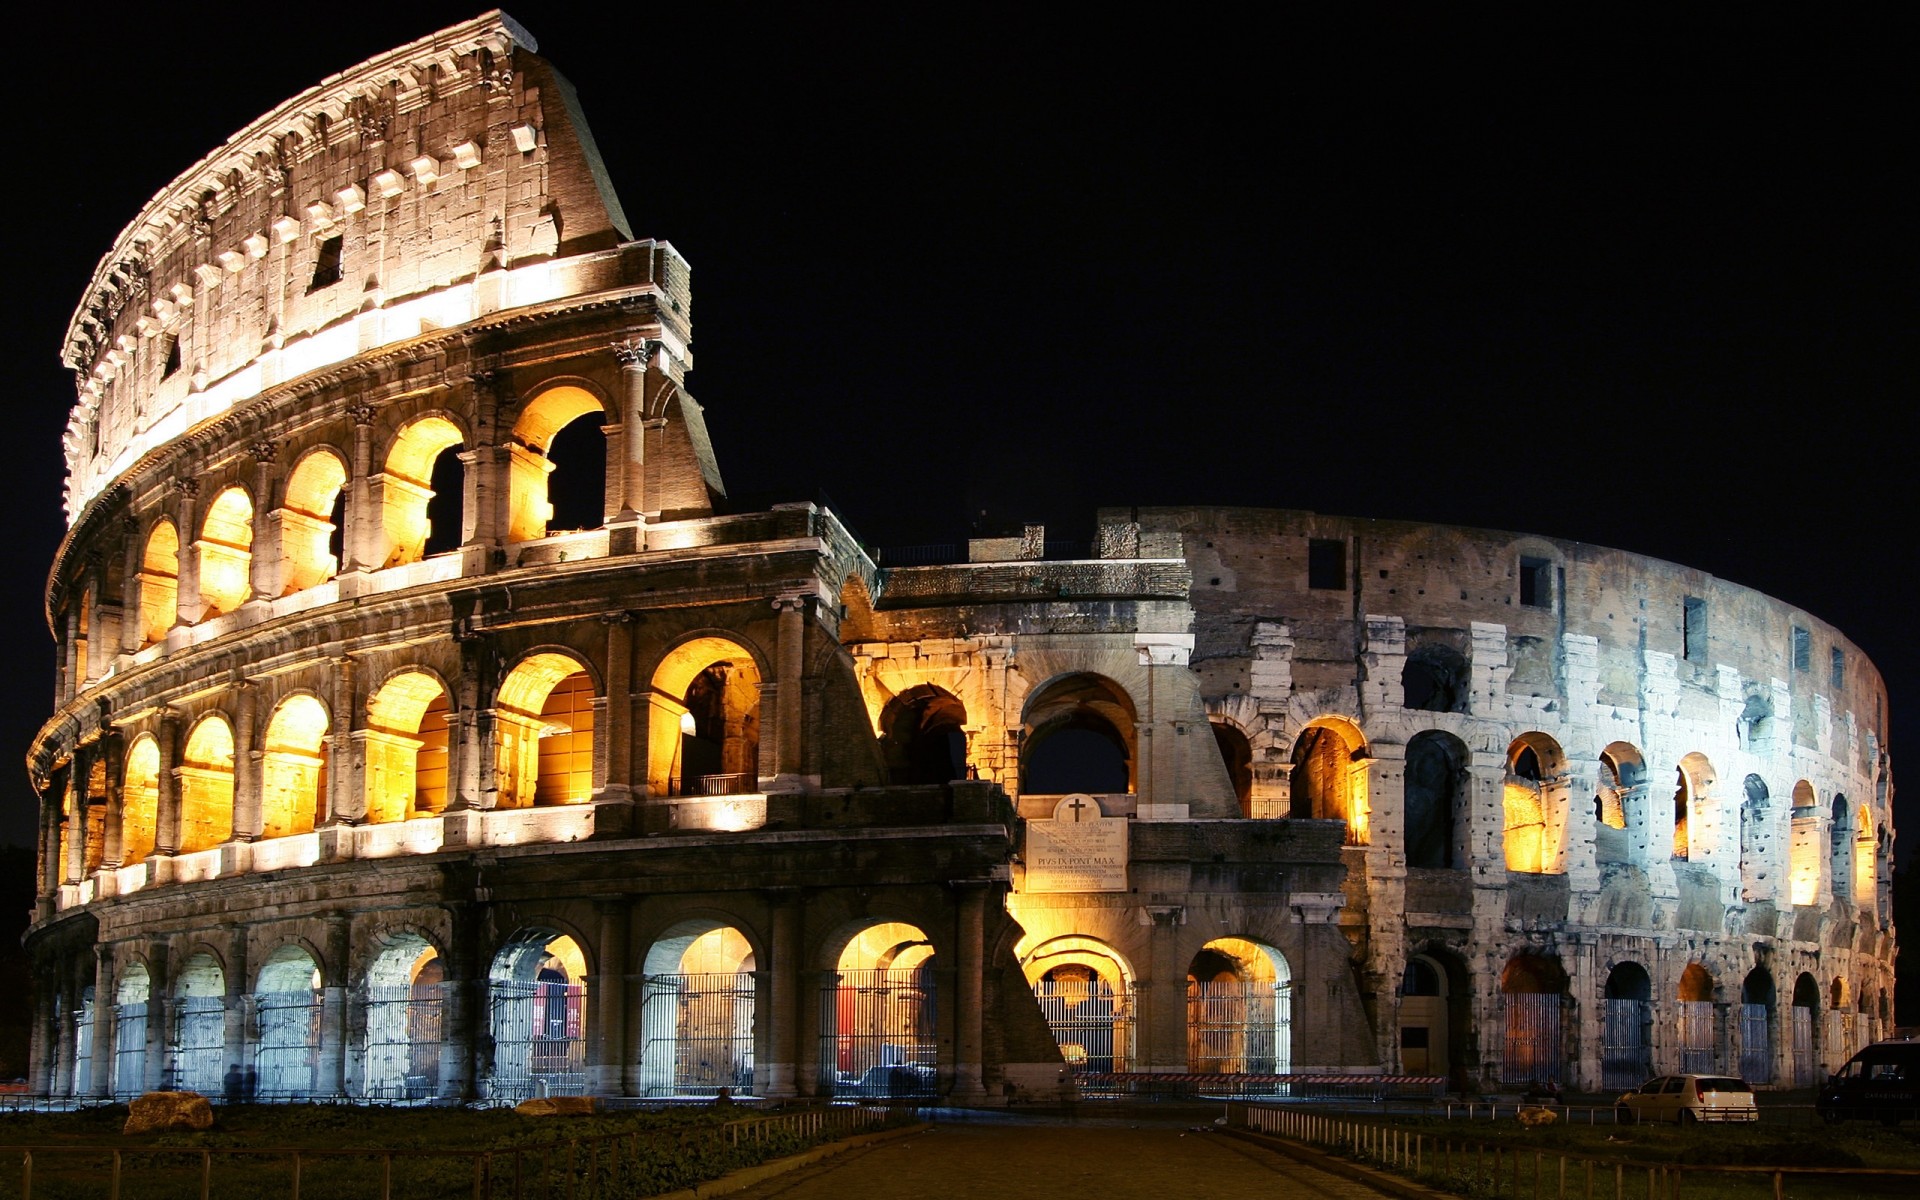 italy amphitheater colosseum architecture stadium travel theater ancient dusk gladiator building illuminated arch landmark evening tourism old famous sky city buildings museum monument background